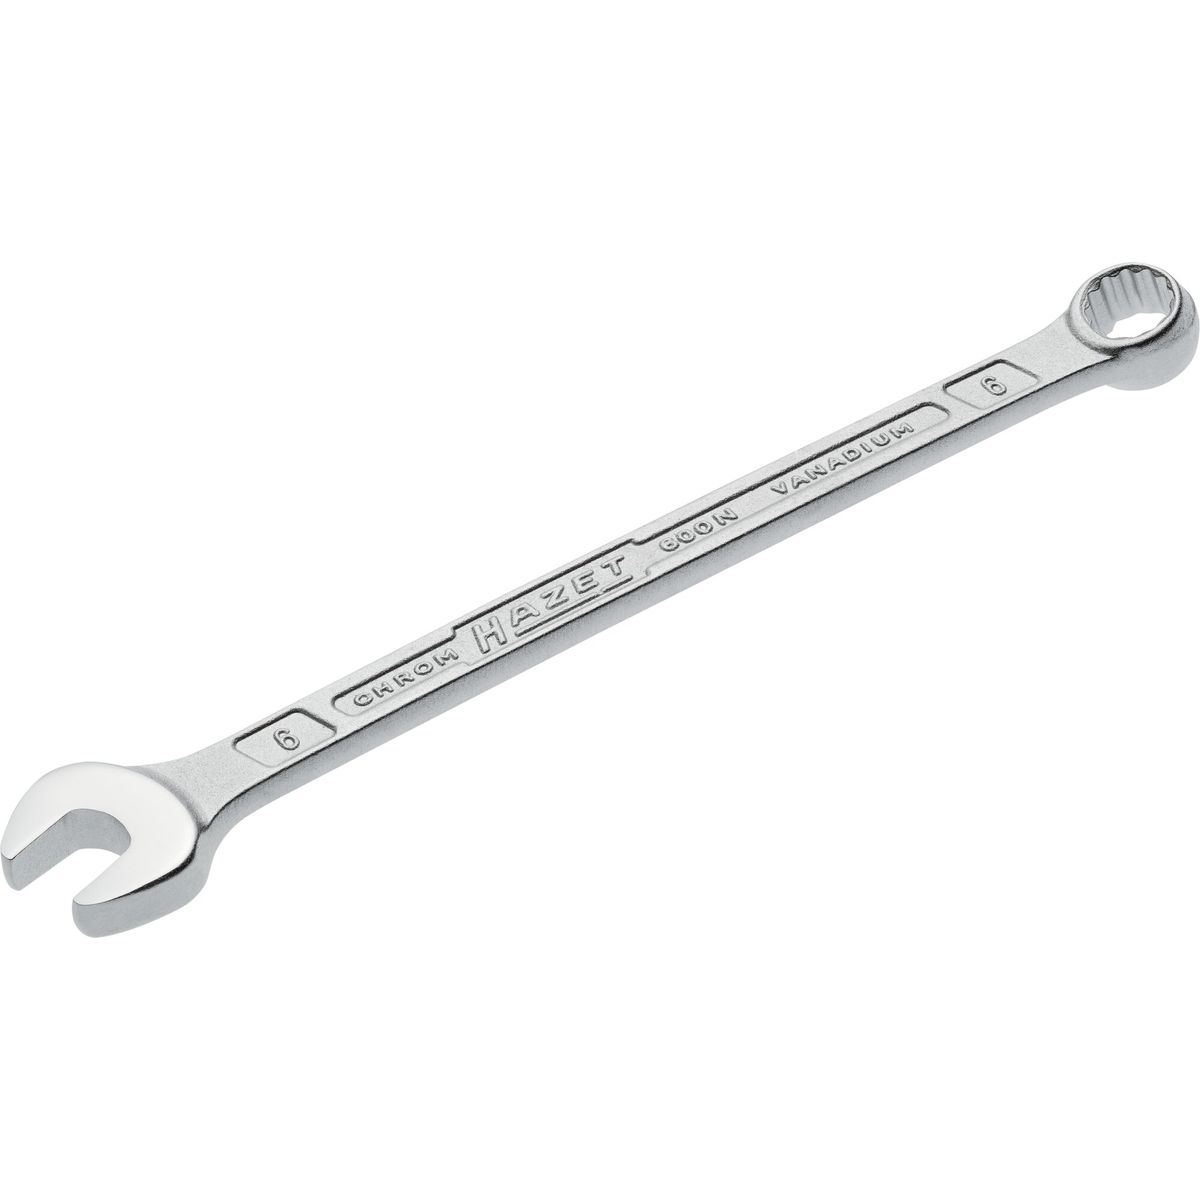 Combination Wrench No.600N-6 Hazet®